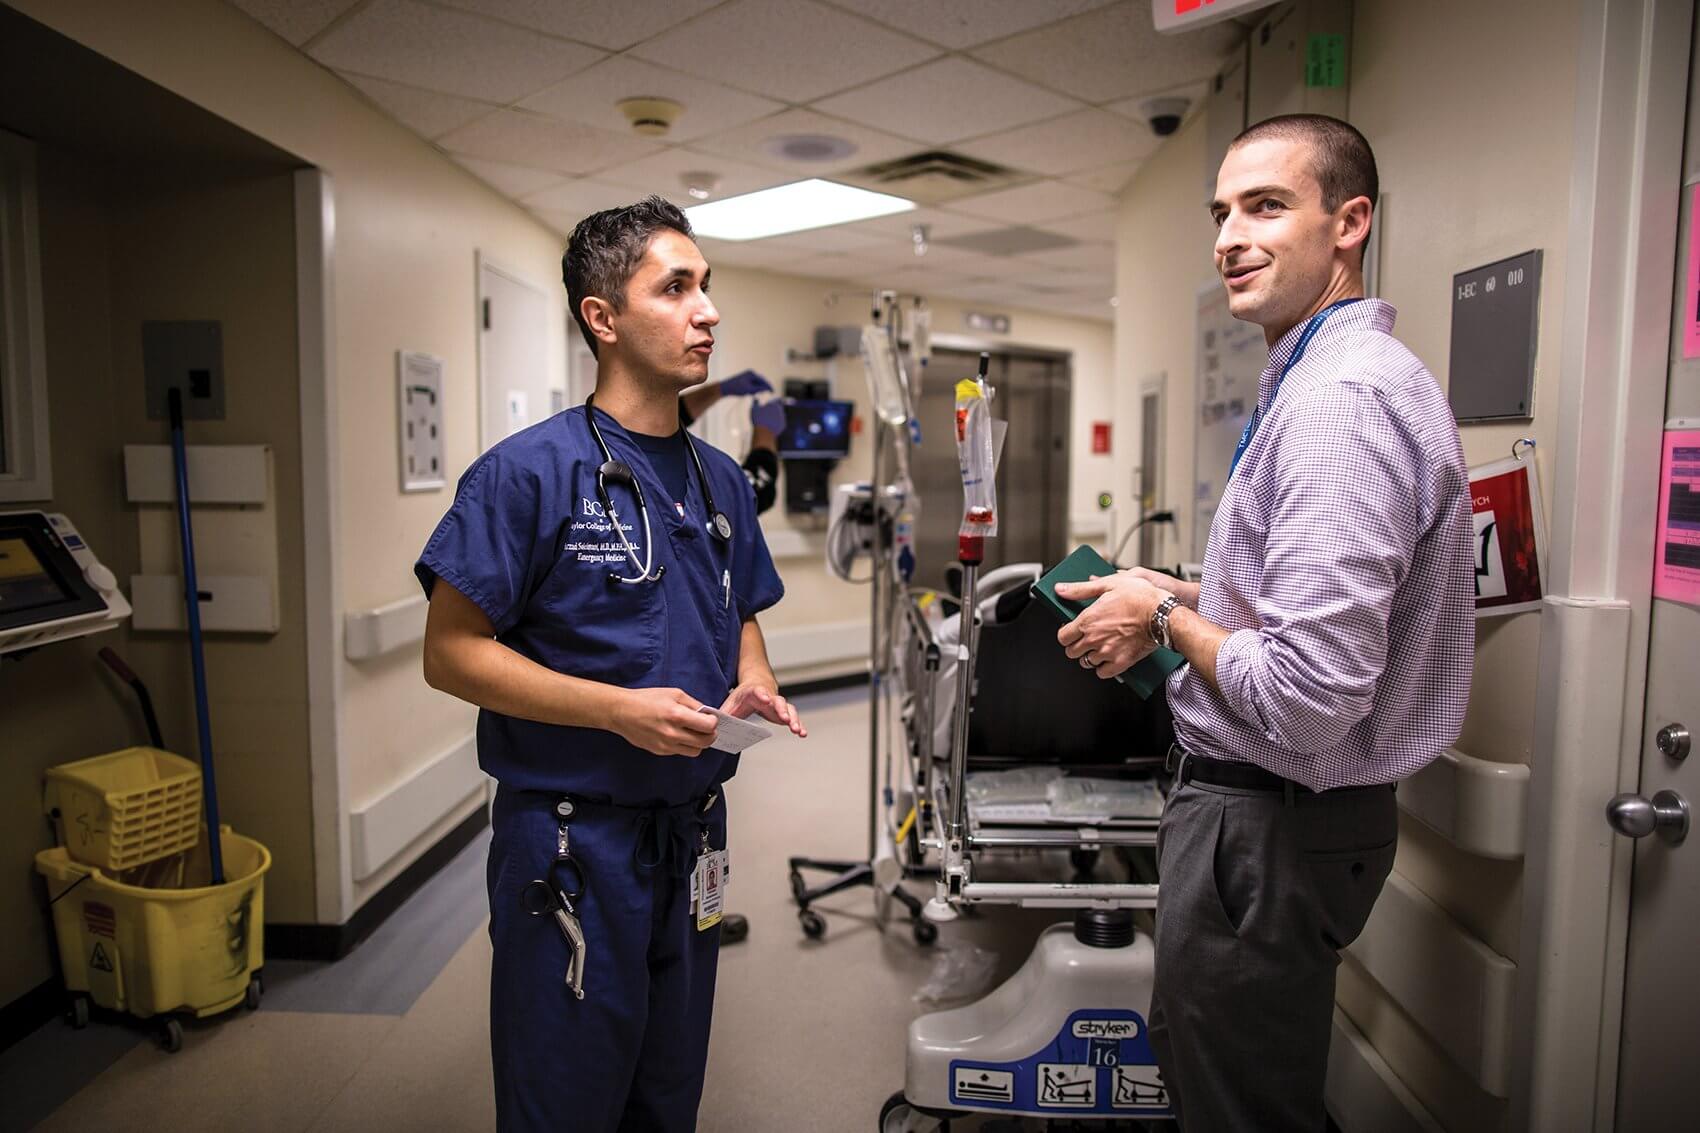 Farzad Soleimani, M.D., associate director of TMC Biodesign and assistant professor of emergency medicine at Baylor College of Medicine, confers with digital health fellow Dave Morris.